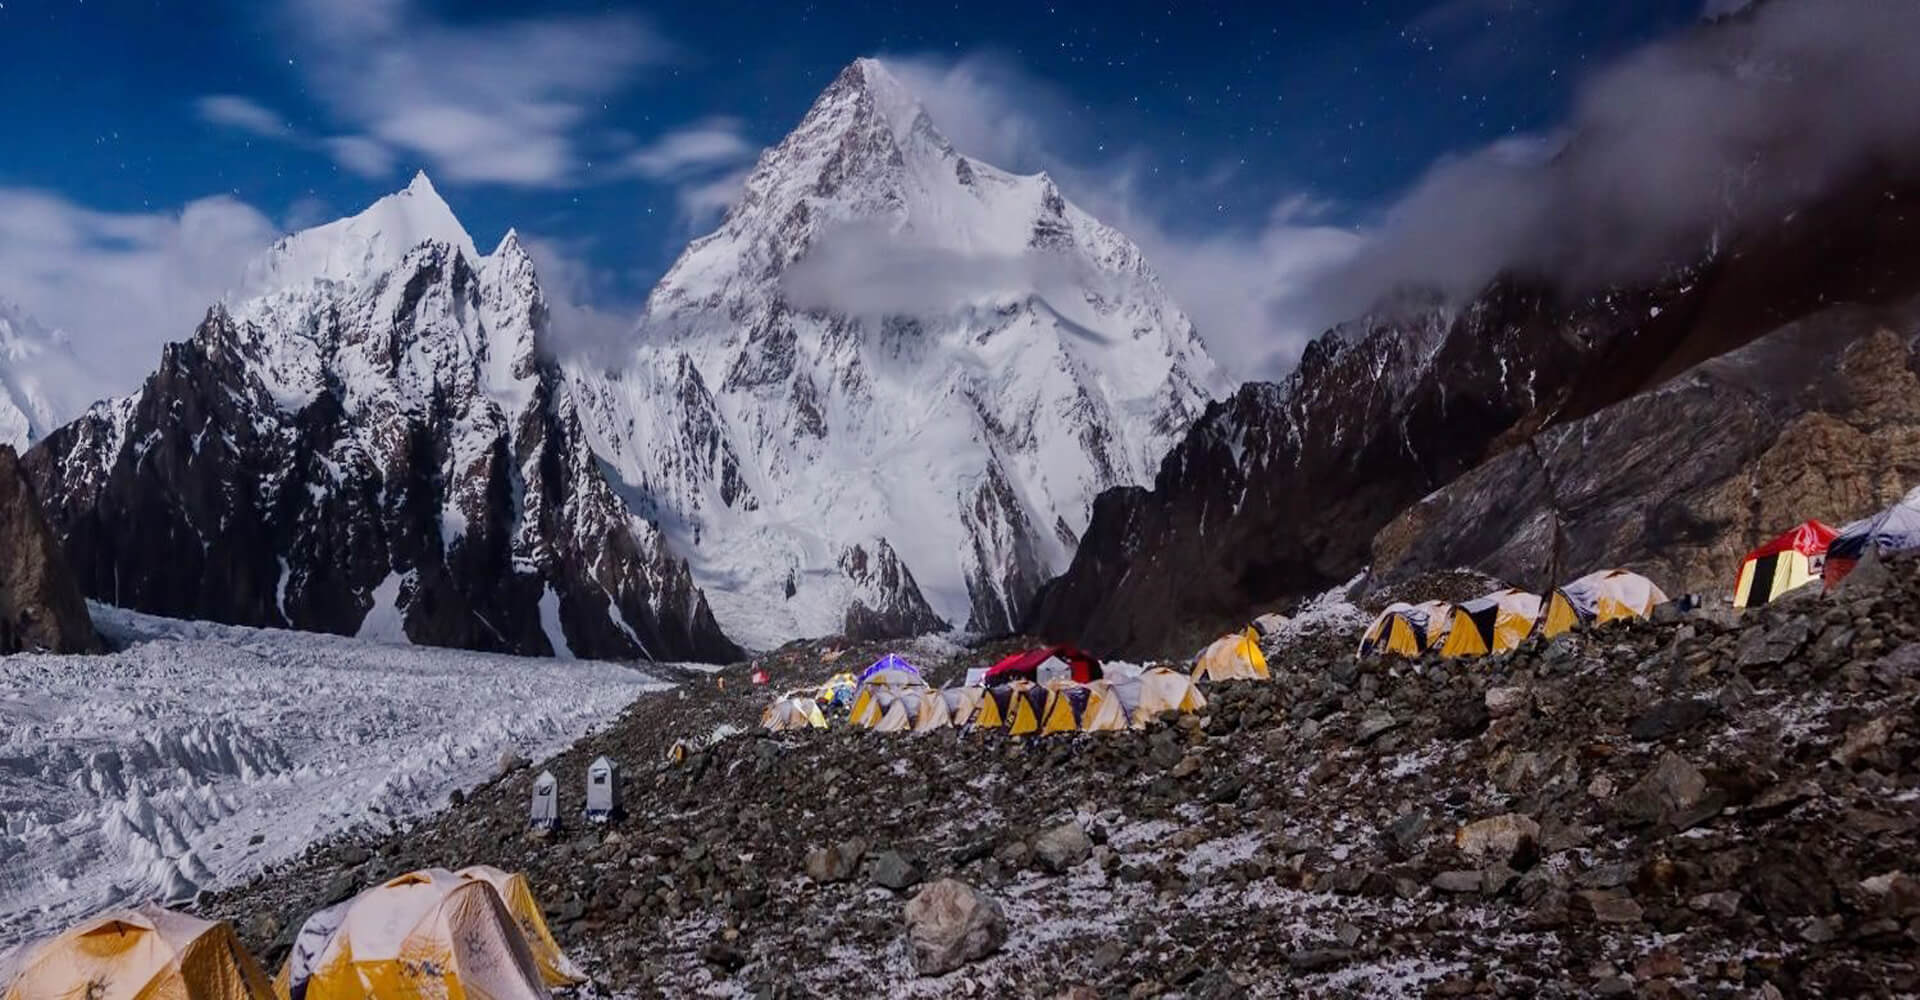 K2 base camp and Concoardia